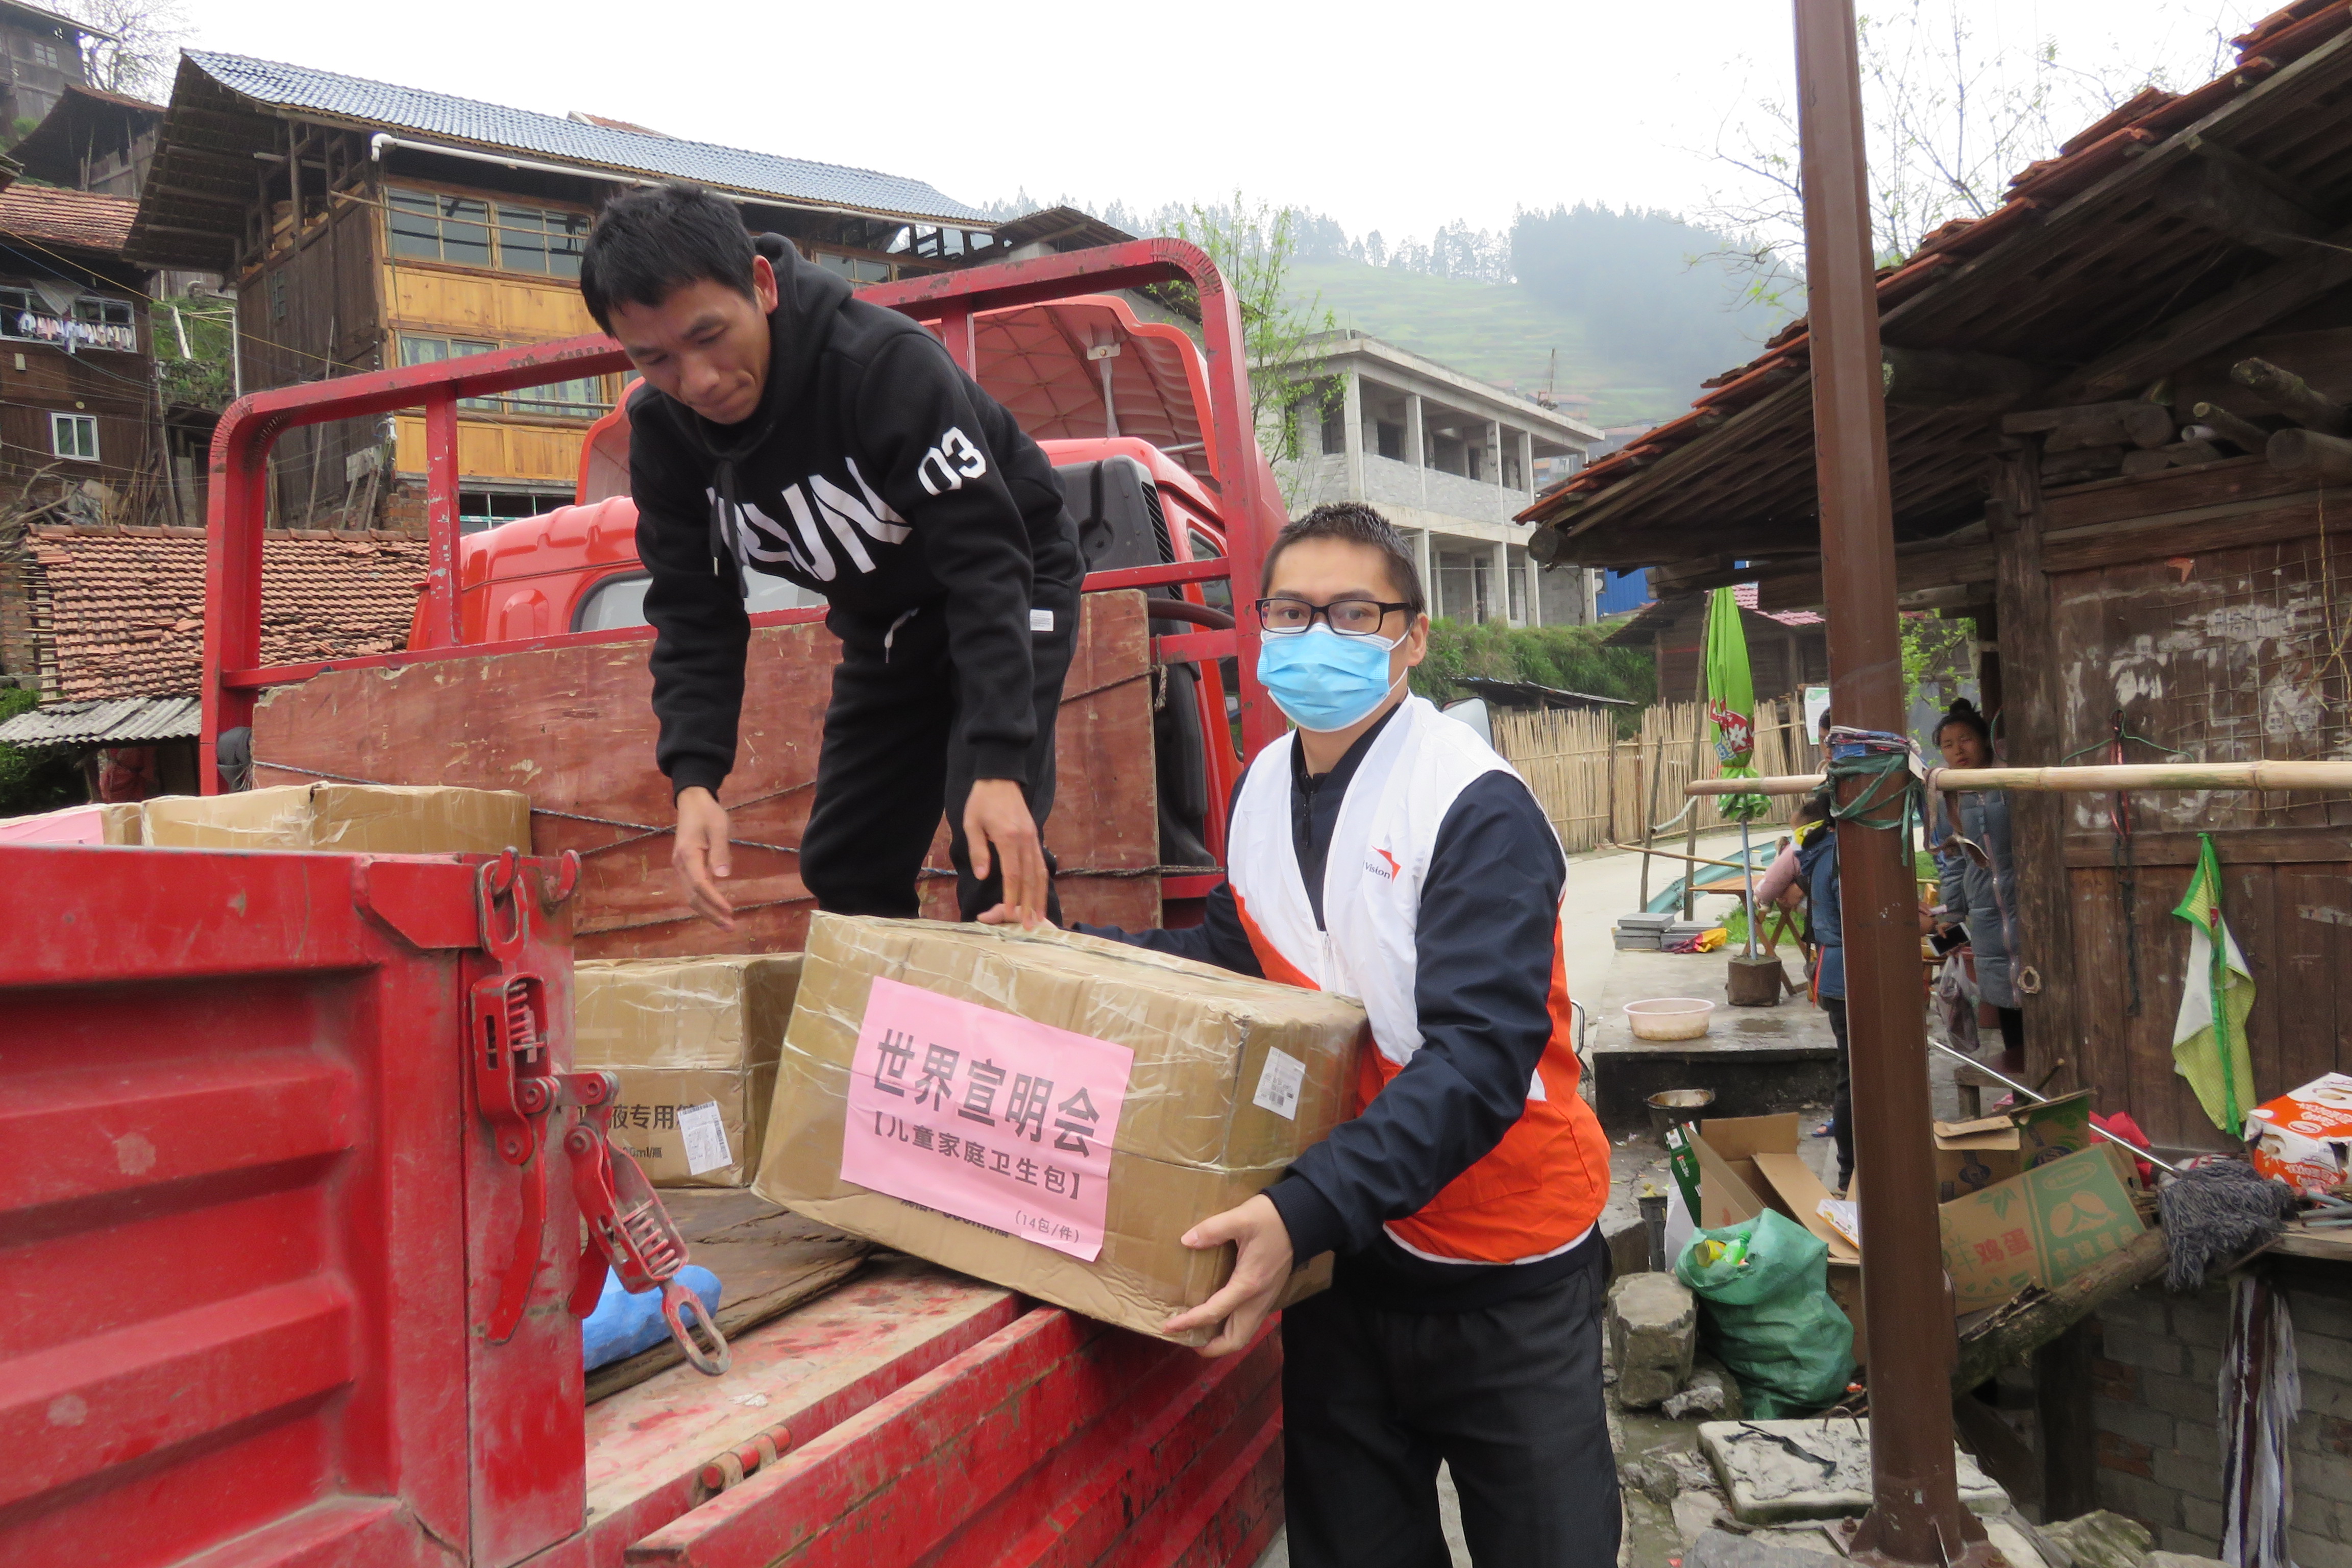 World Vision workers in China take food assistance packages off a truck